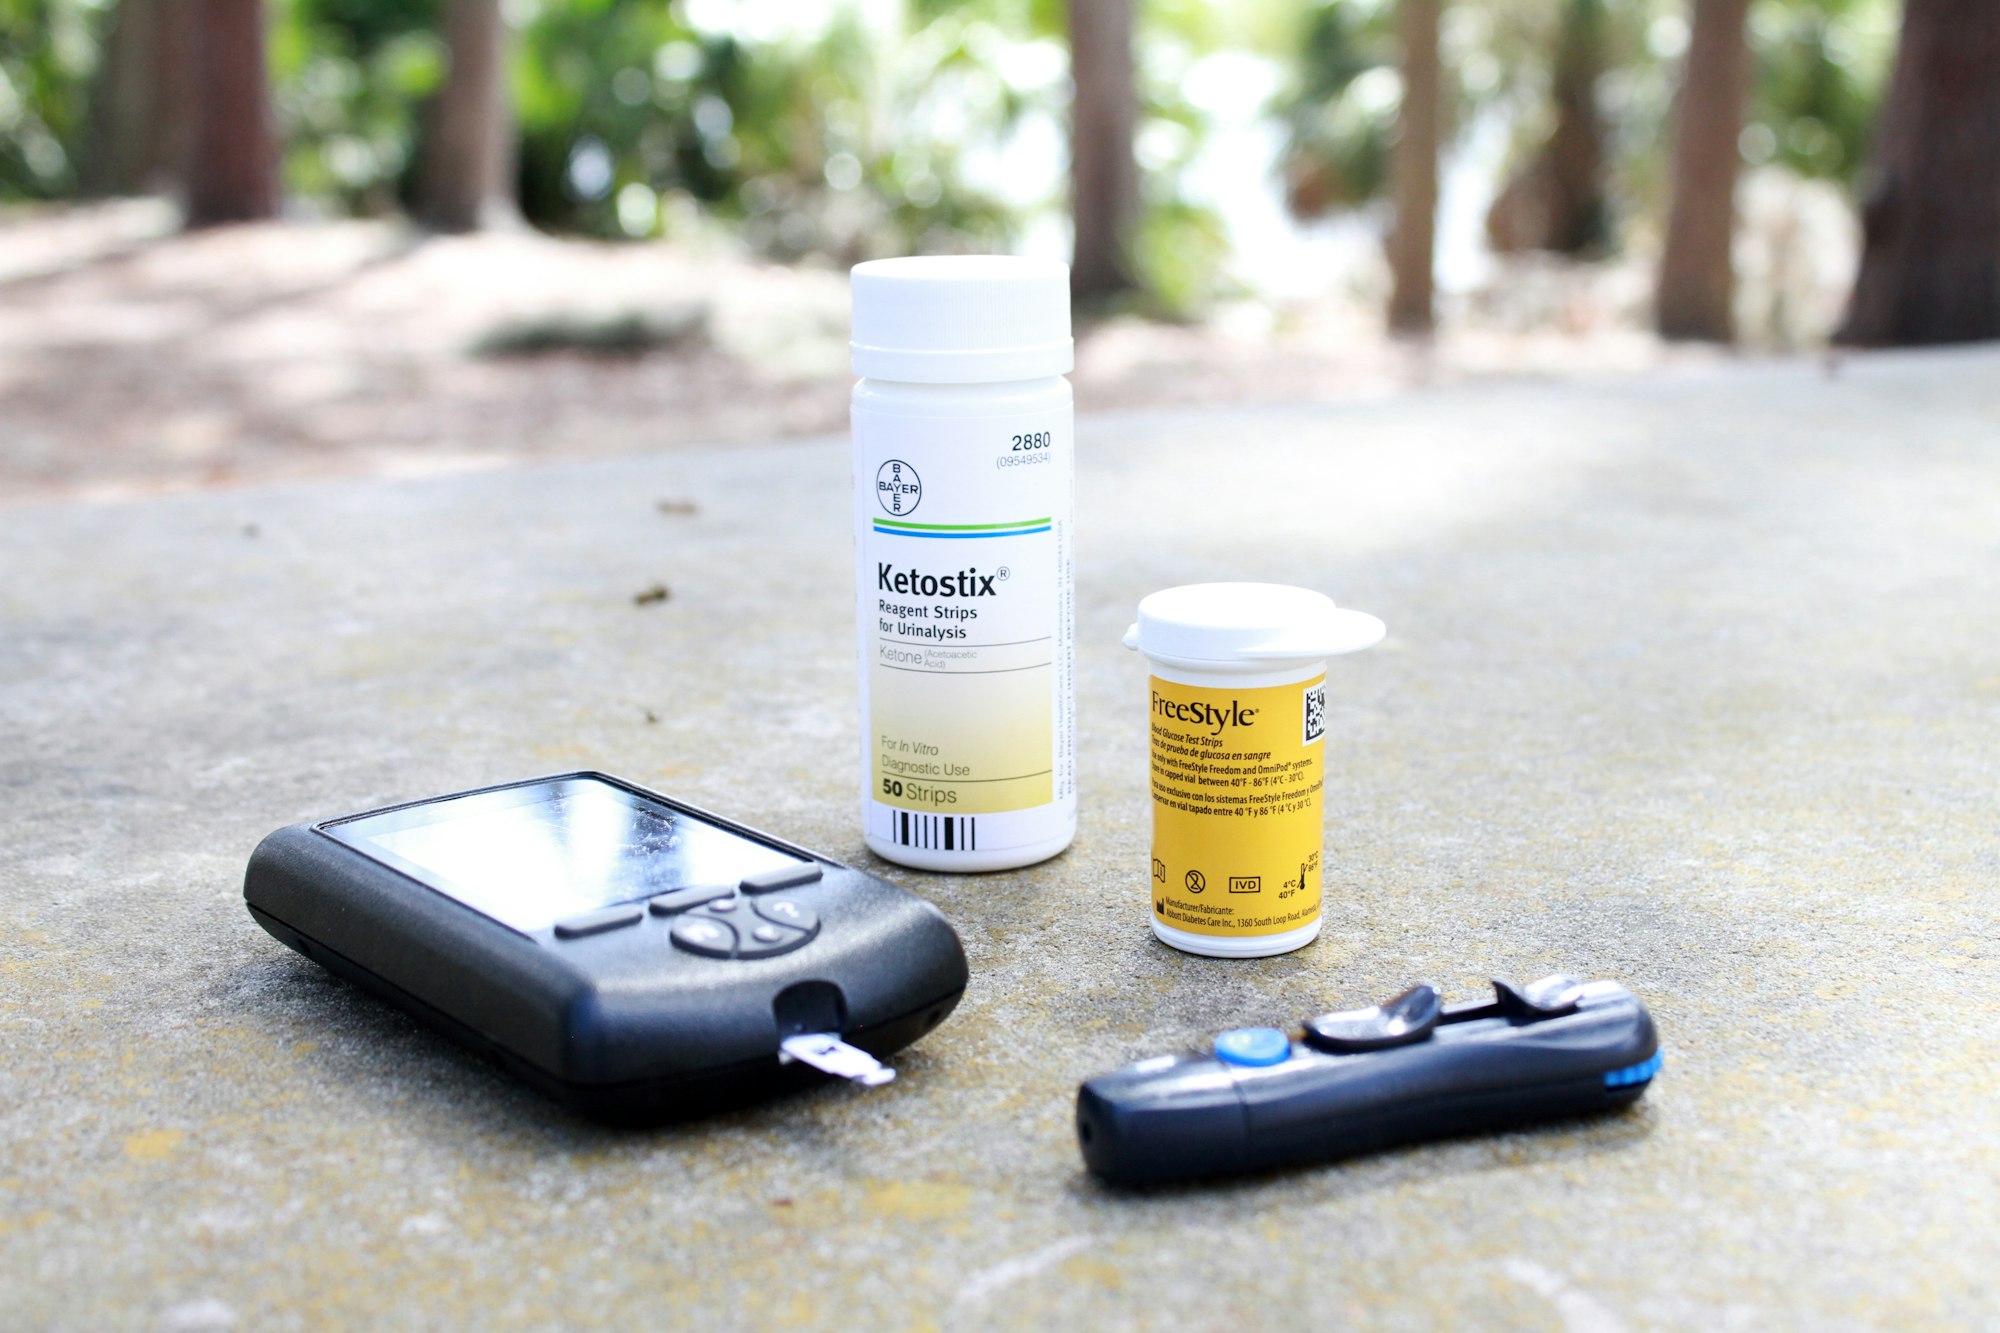 This healthtech startup secured $11 million funding to solve diabetes management challenges in India